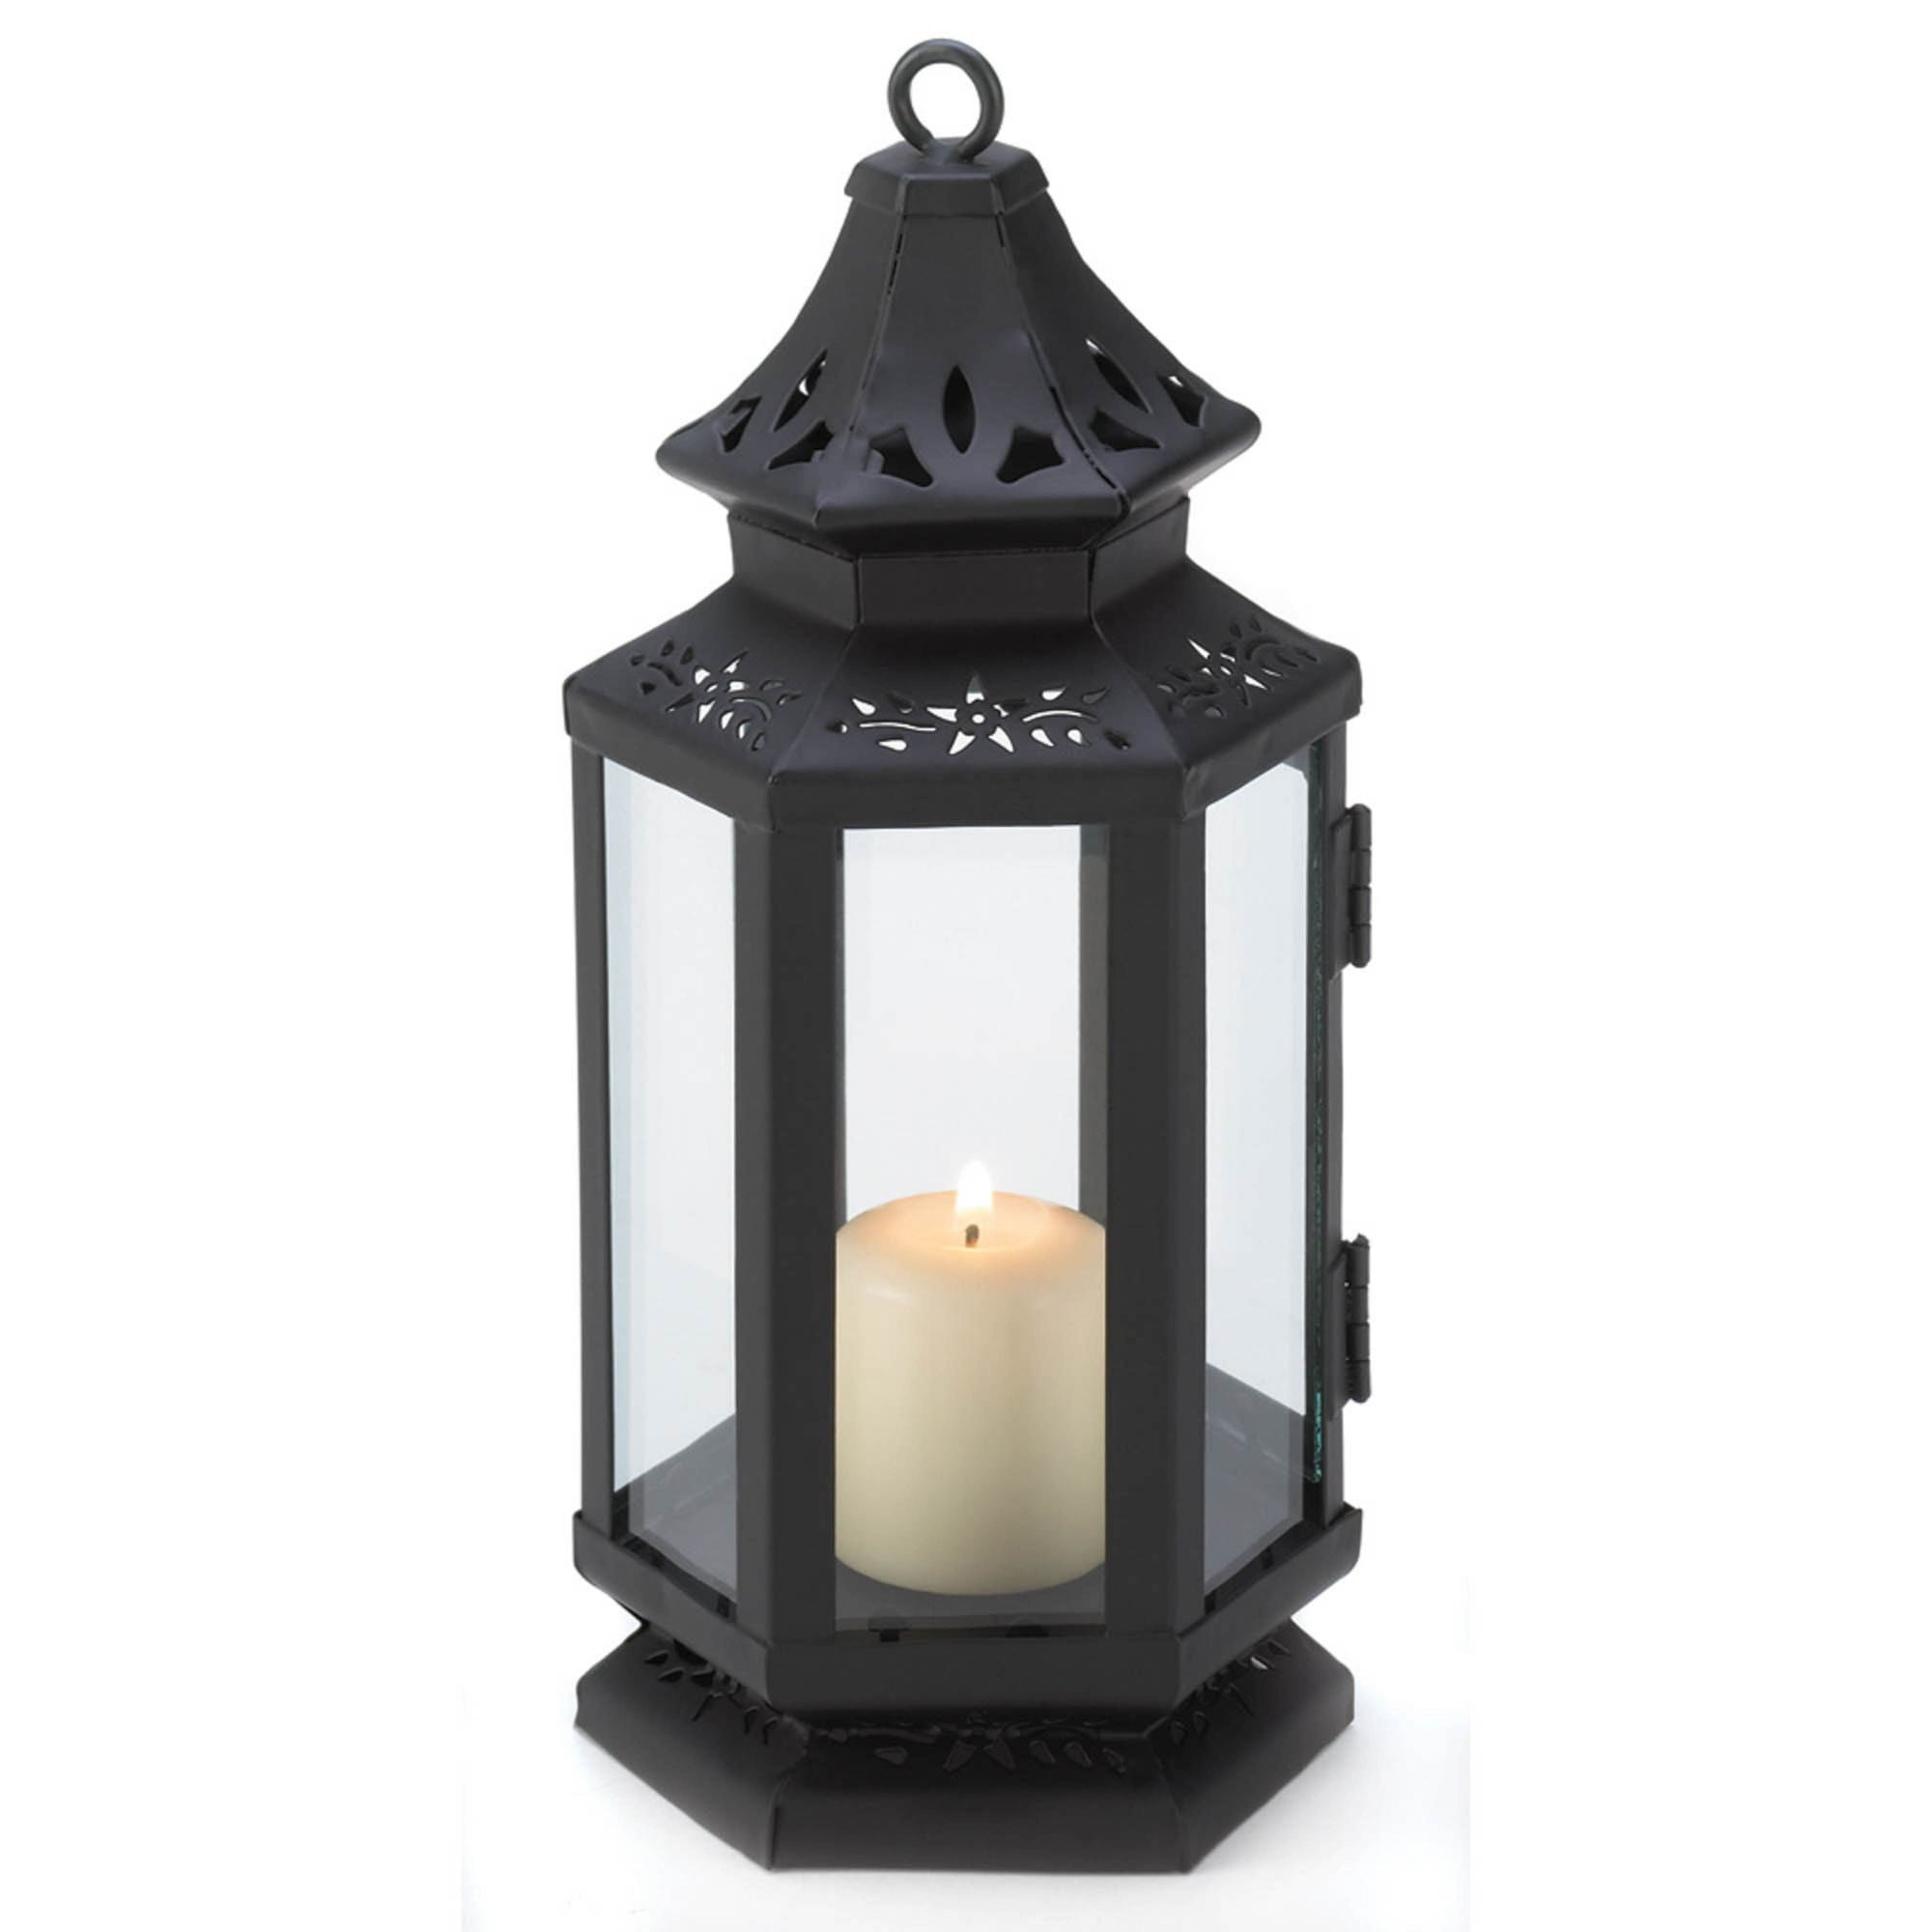 Details about   9.5” White Tabletop LED Lantern w/ Red Panes & Flickering Faux Candle Light 